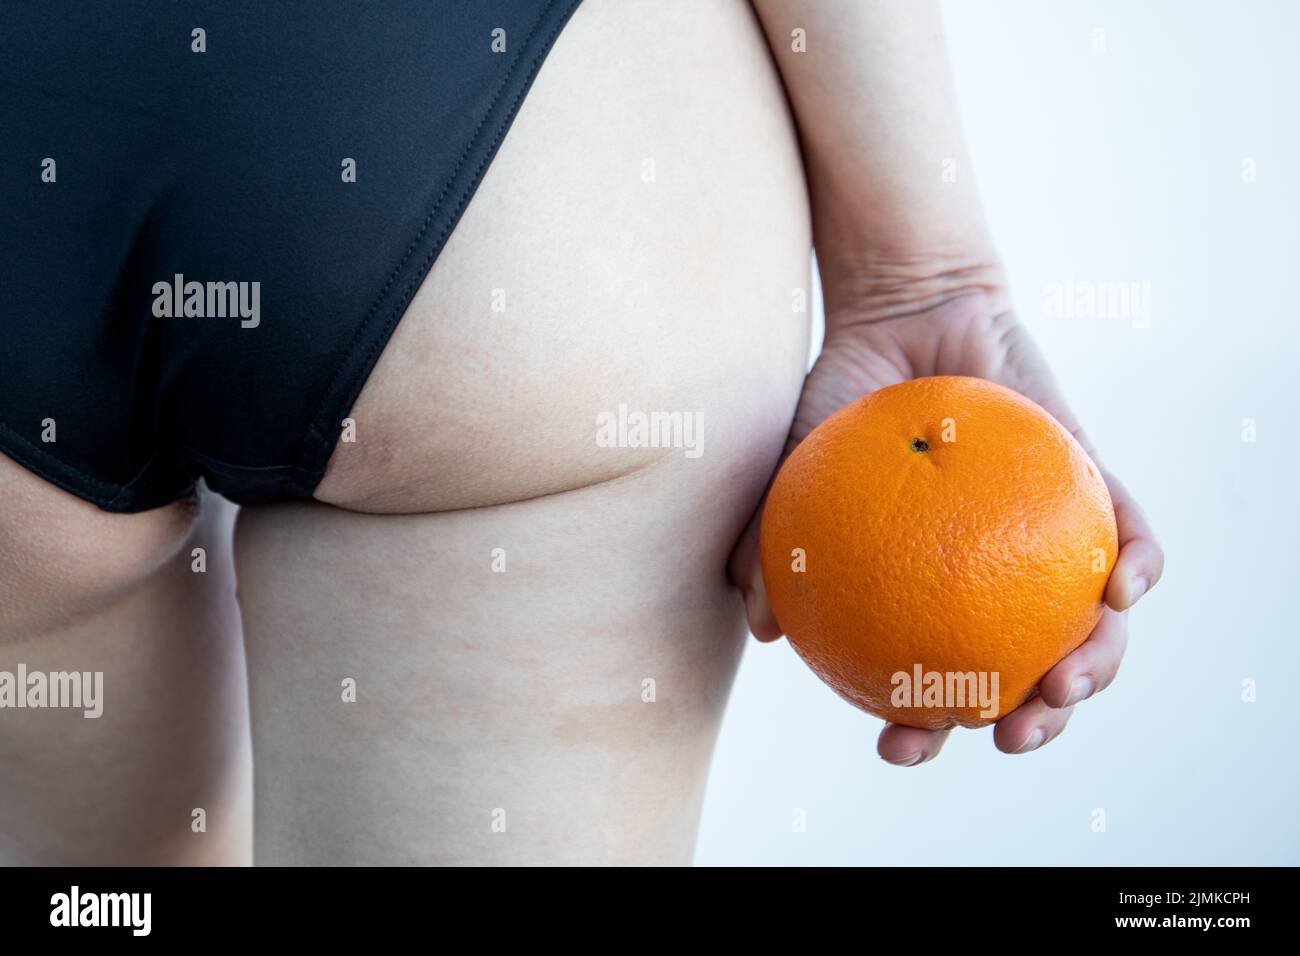 Cellulite or orange skin effect. Woman holding orange by her legs. Stock Photo